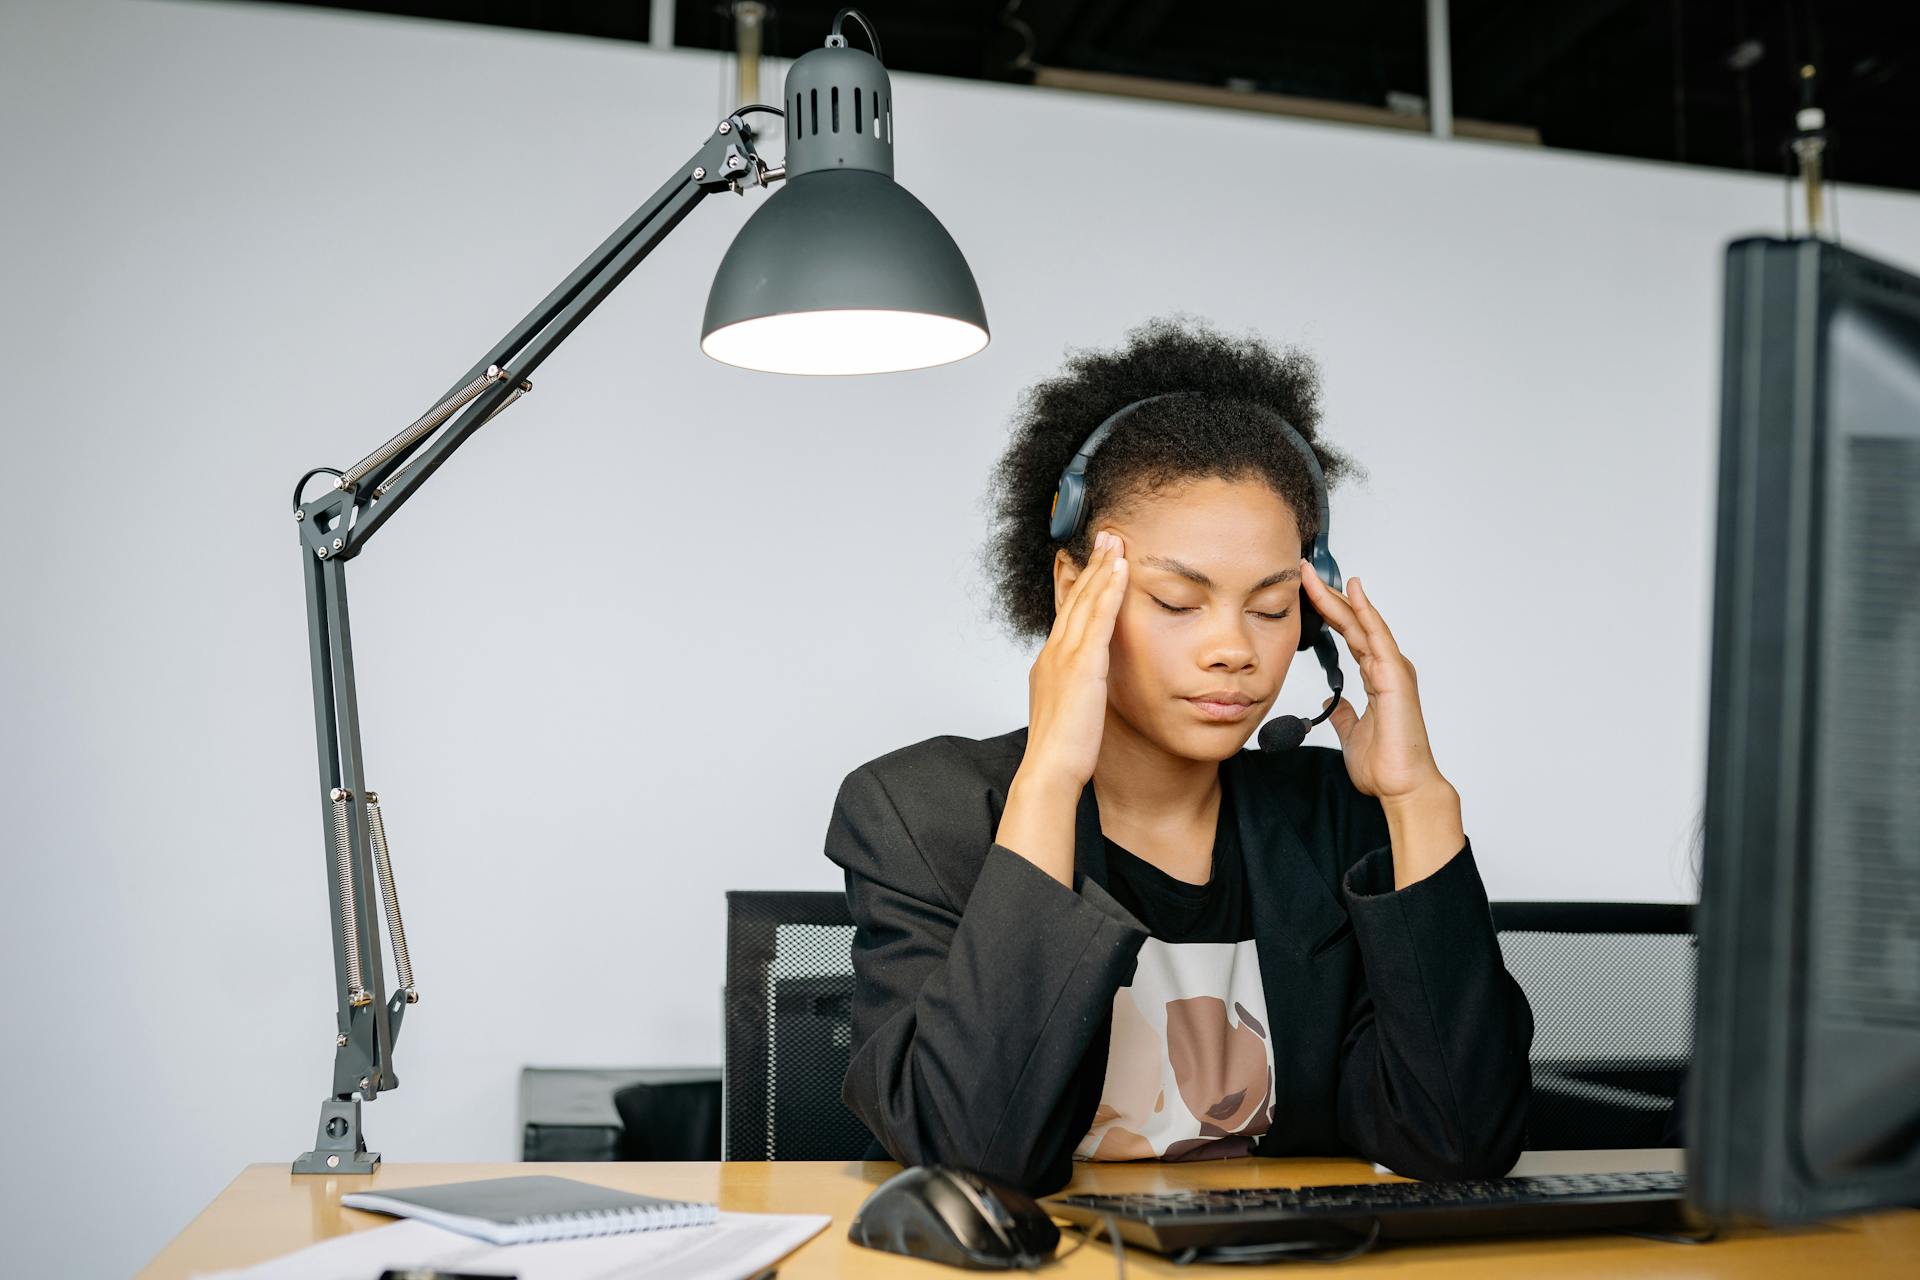 workplace stress vs. burnout and work performance